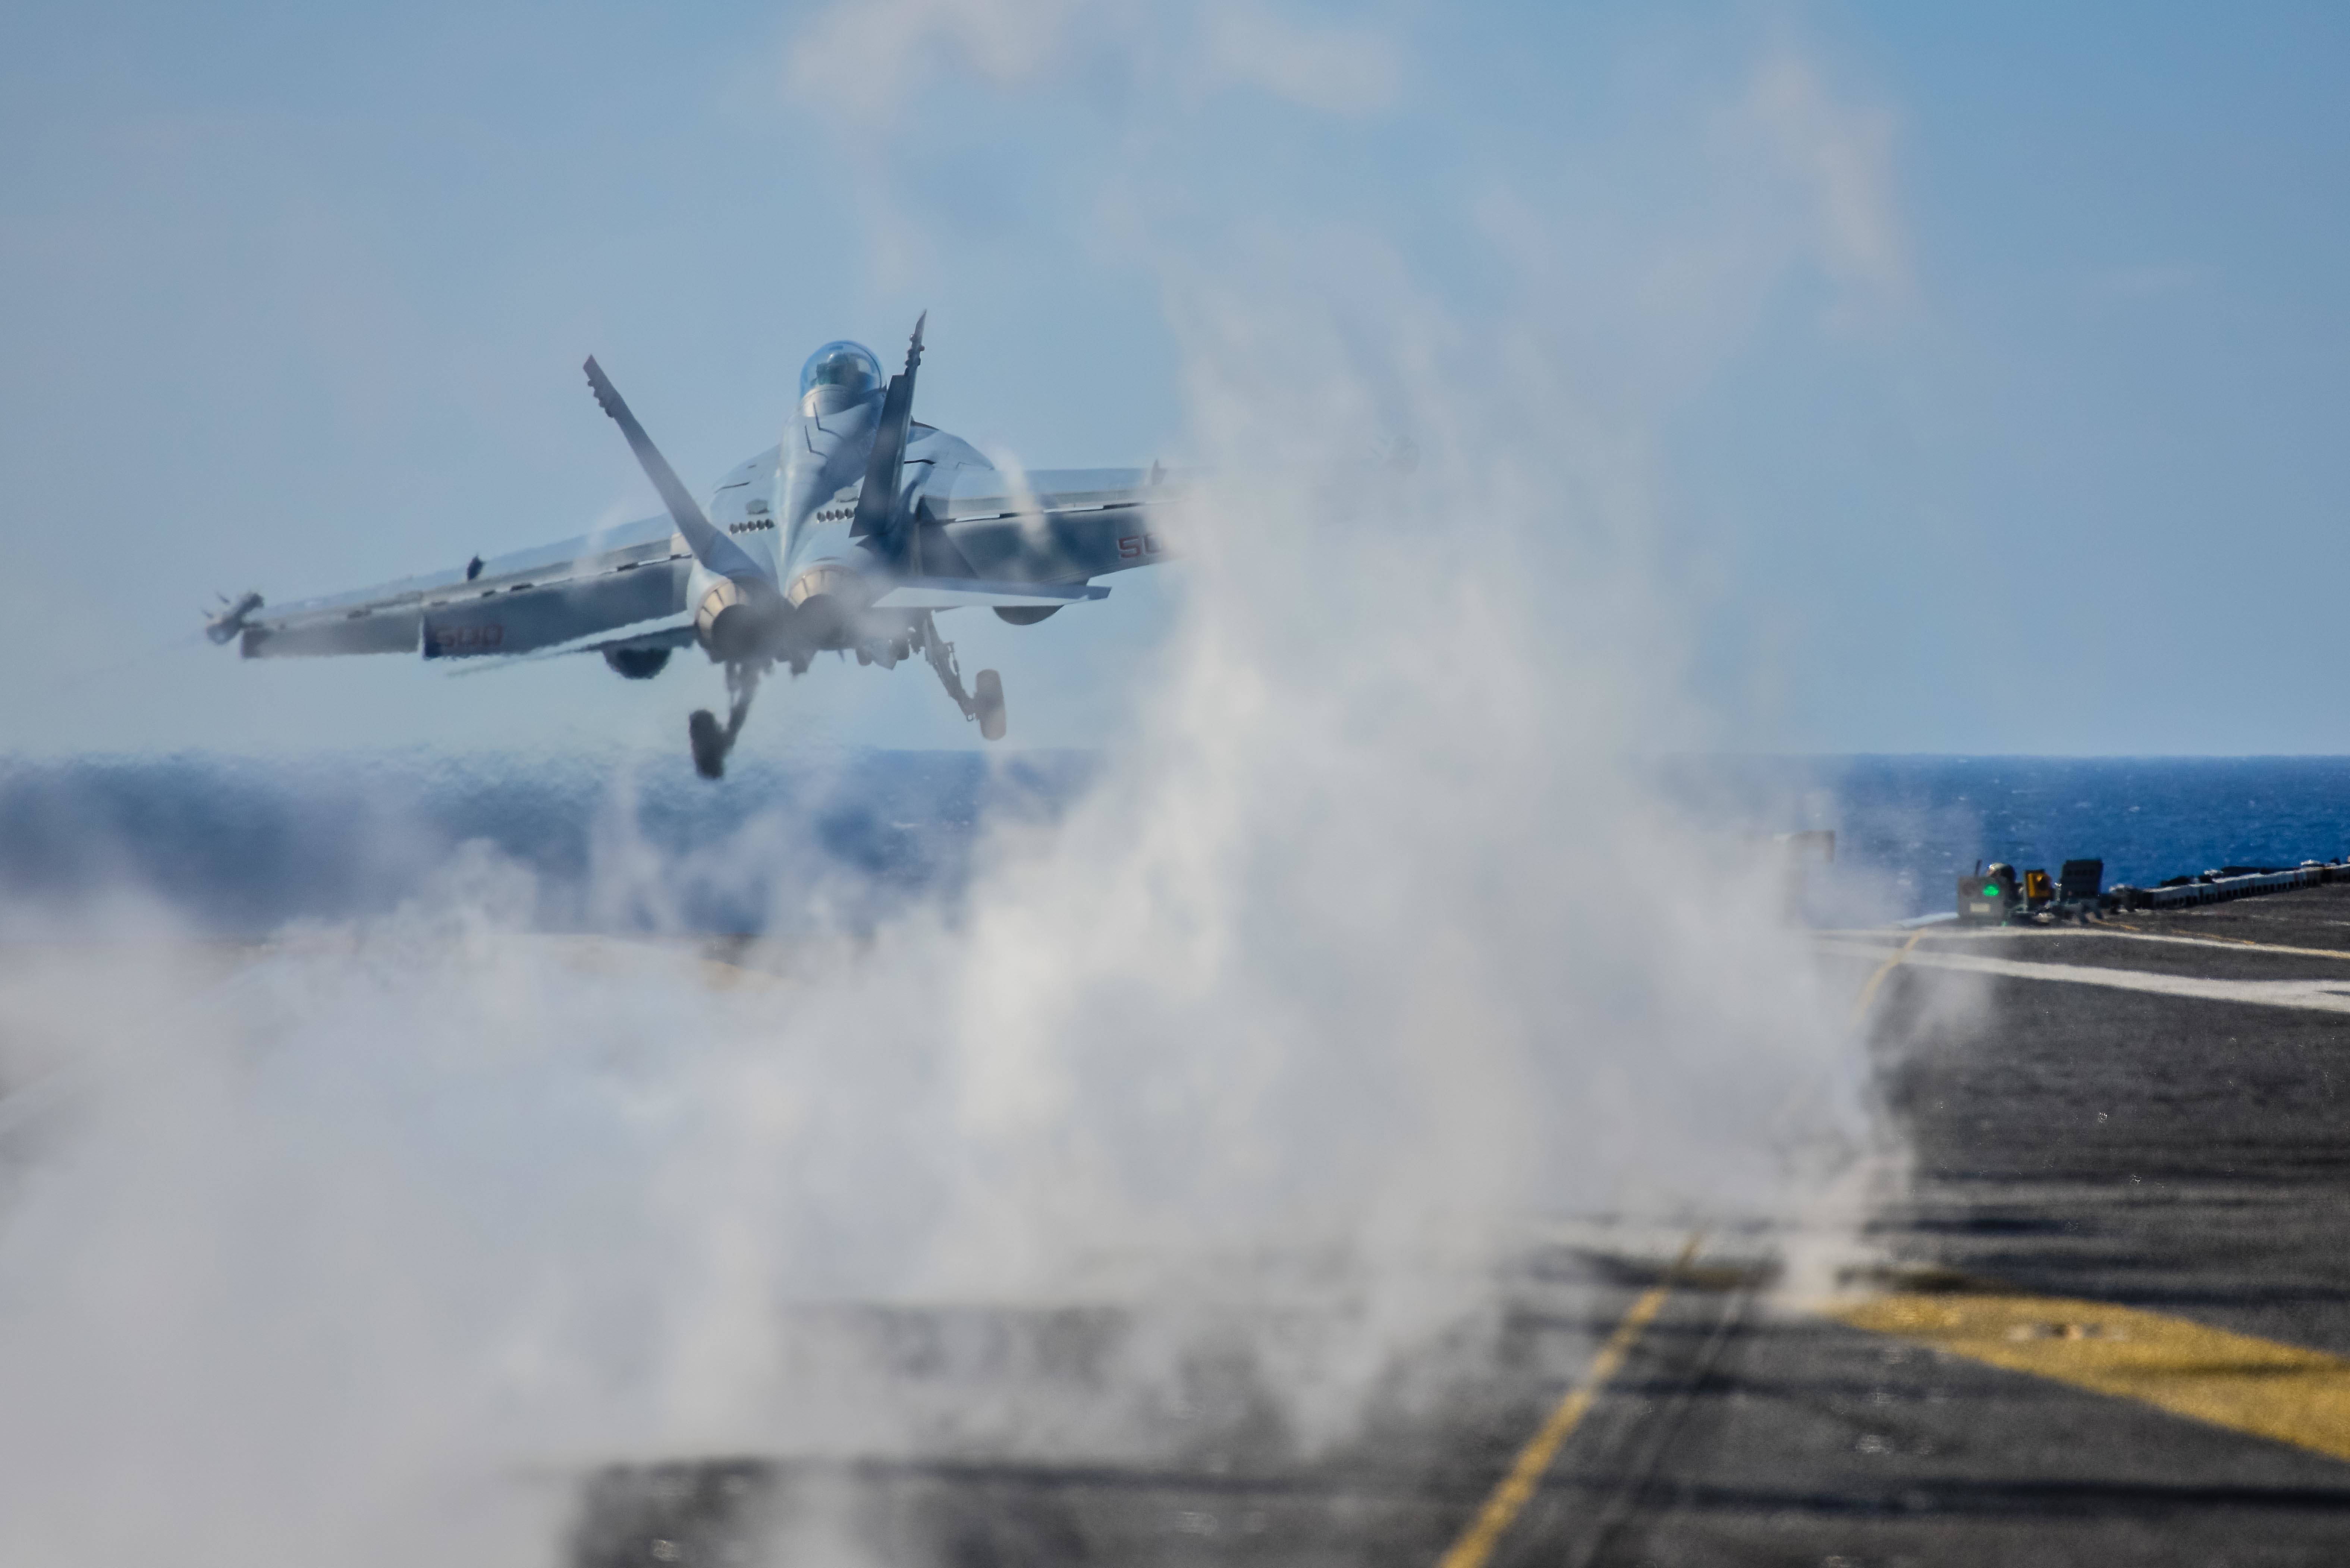 An E/A-18G Growler attached to the Wizards of Electronic Attack Squadron (VAQ) 133 launches from the flight deck of the aircraft carrier USS John C. Stennis (CVN 74) on April 20, 2015. US Navy photo.